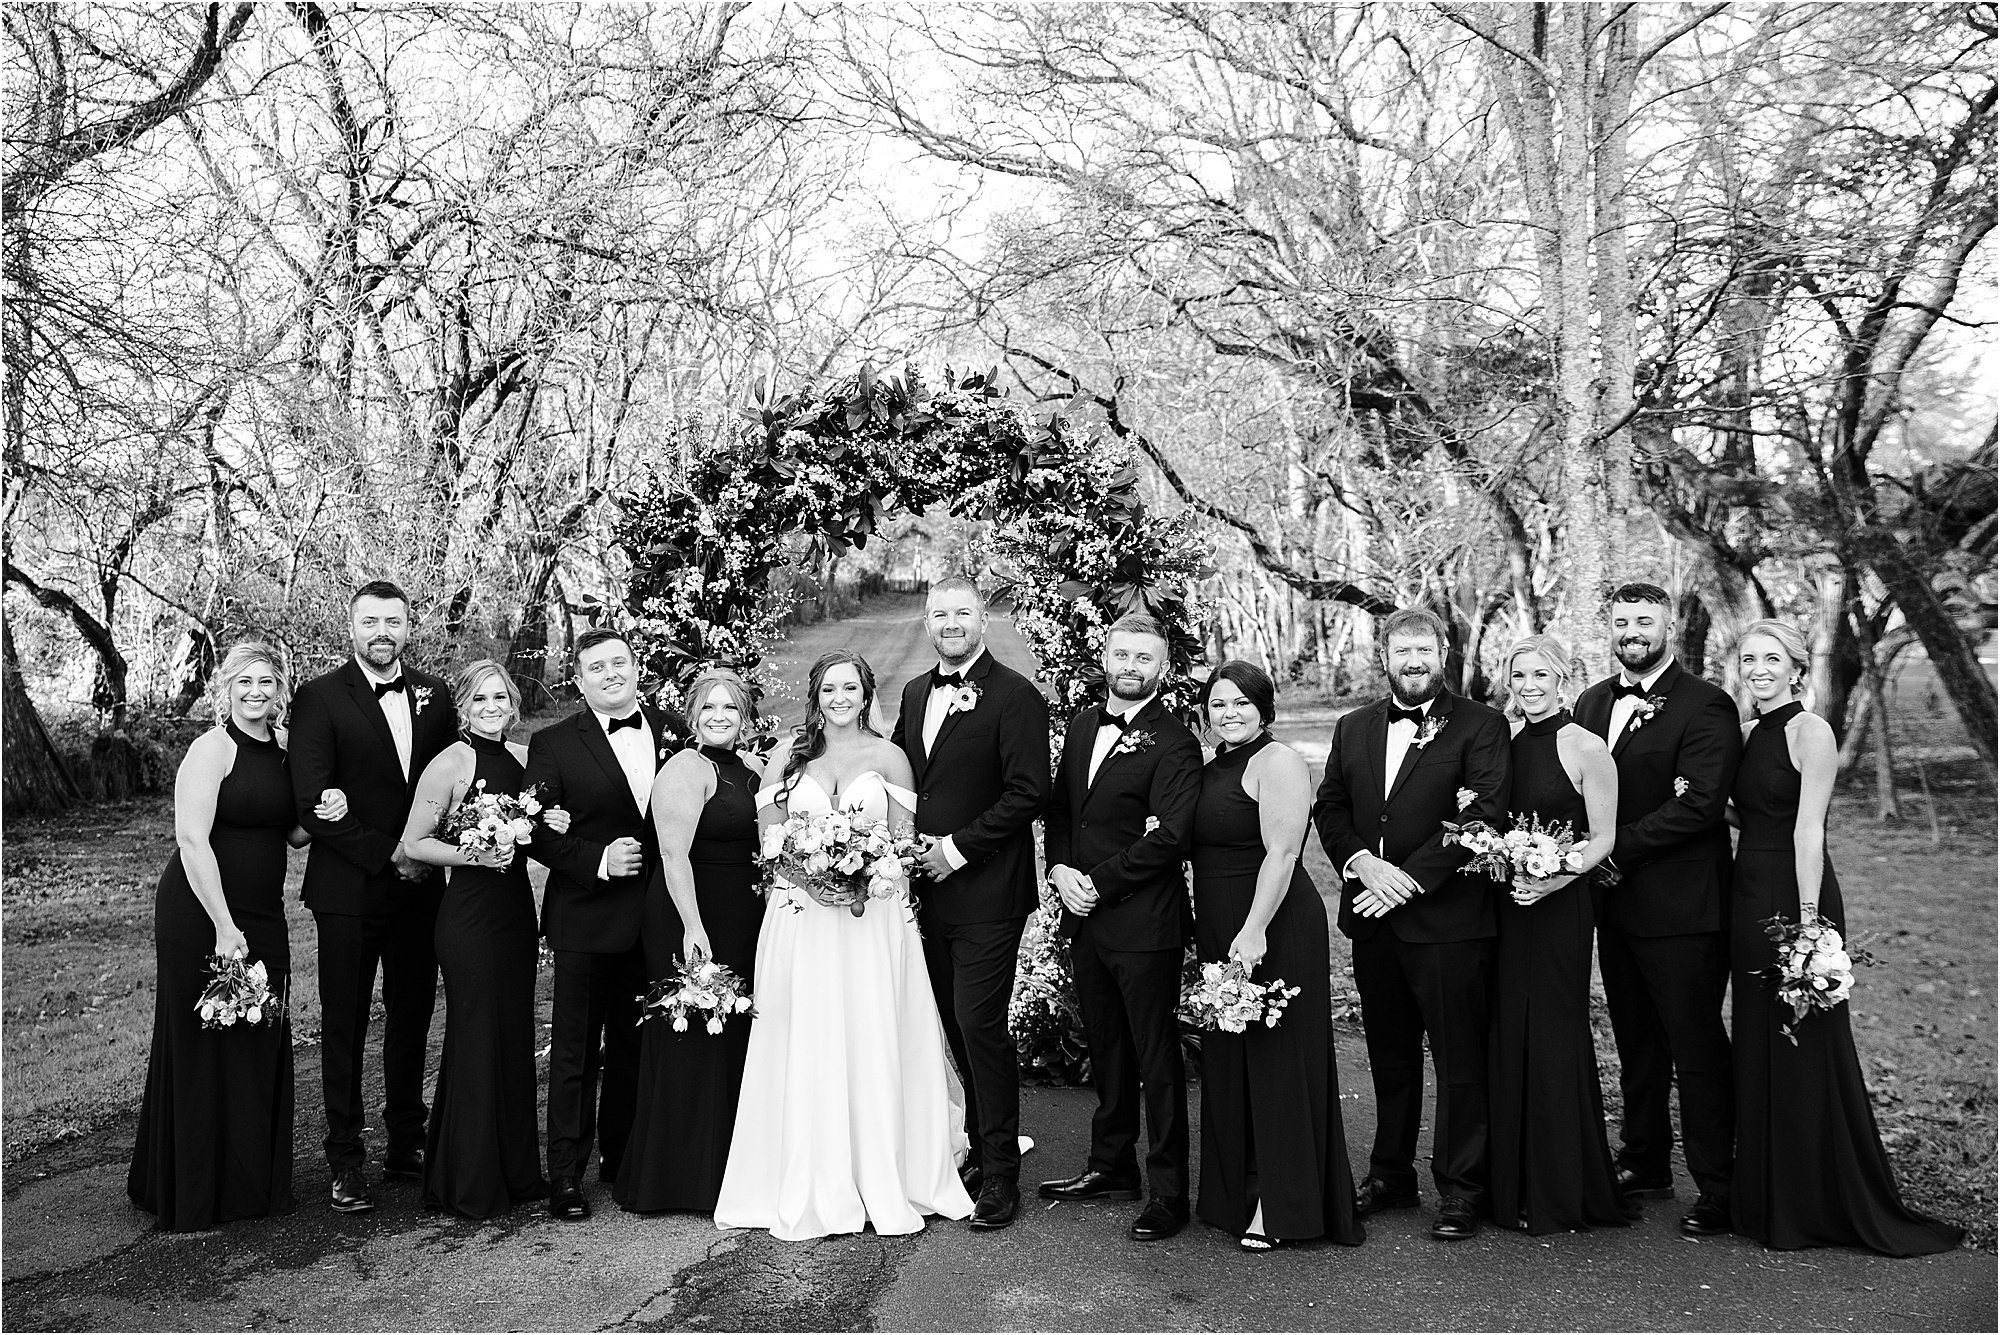 black and white photo of wedding party with bridesmaids and groomsmen